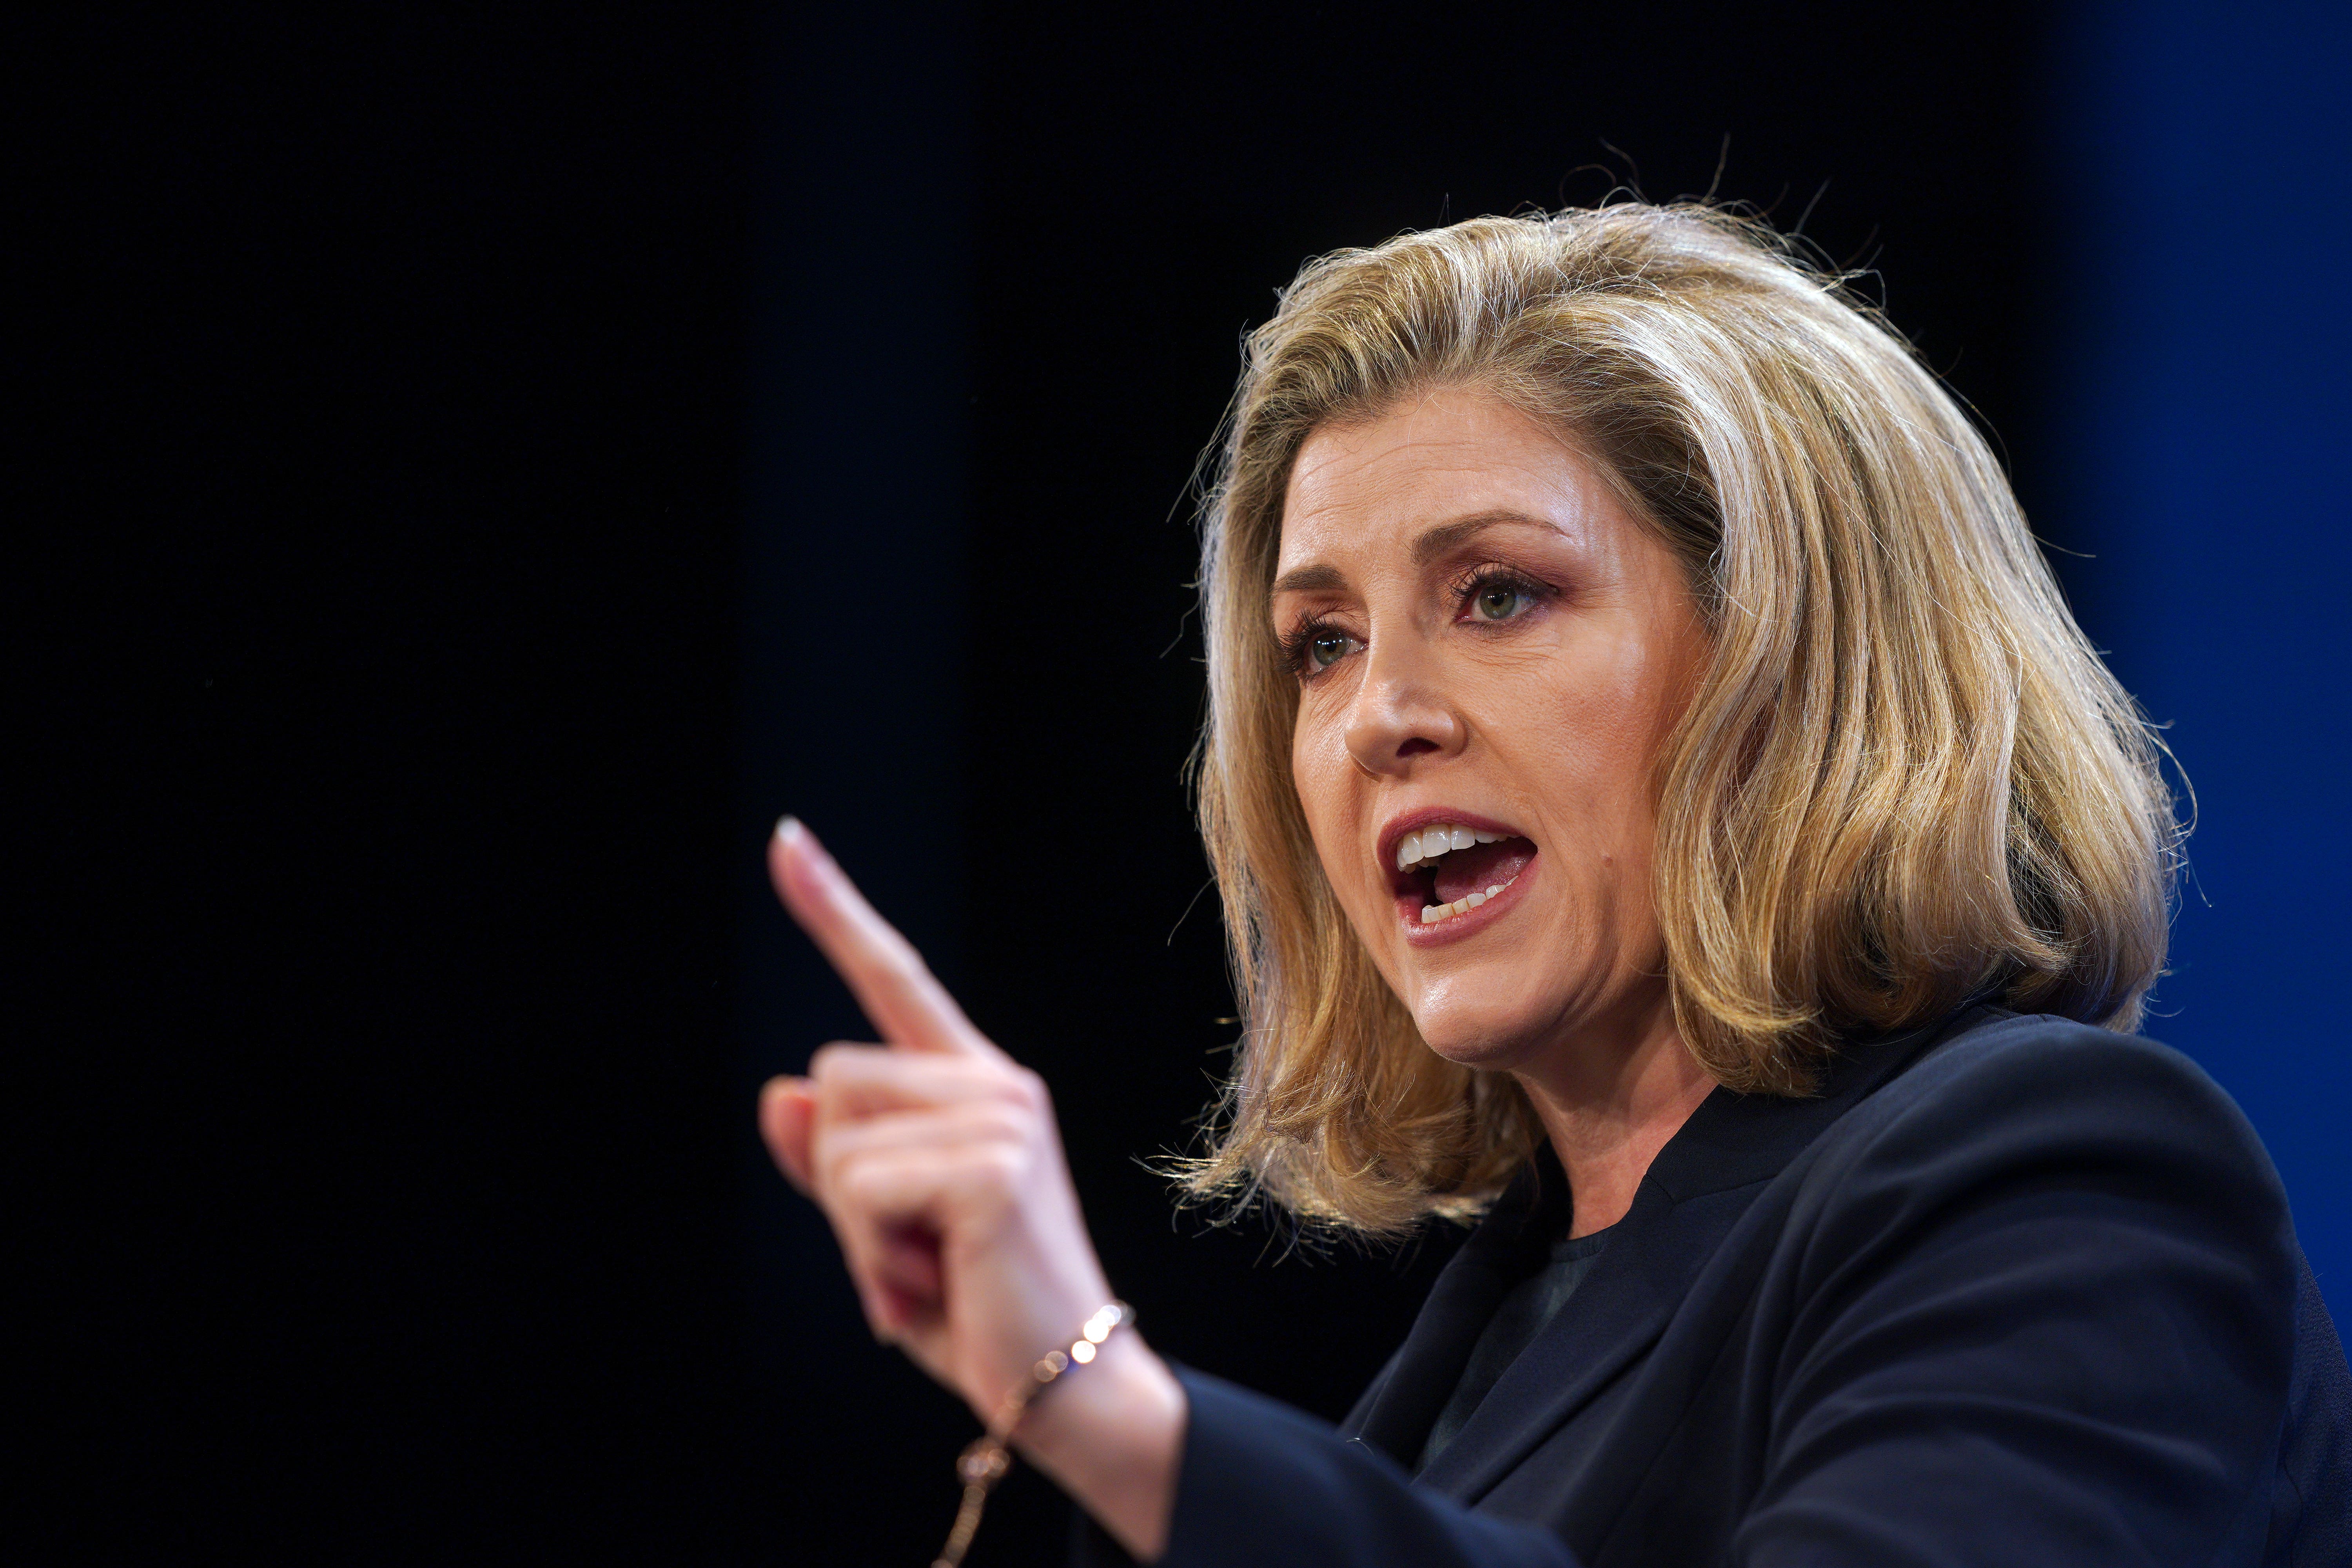 Commons Leader Penny Mordaunt said it would not take an ITV drama for compensation to victims of the scandal to be resolved